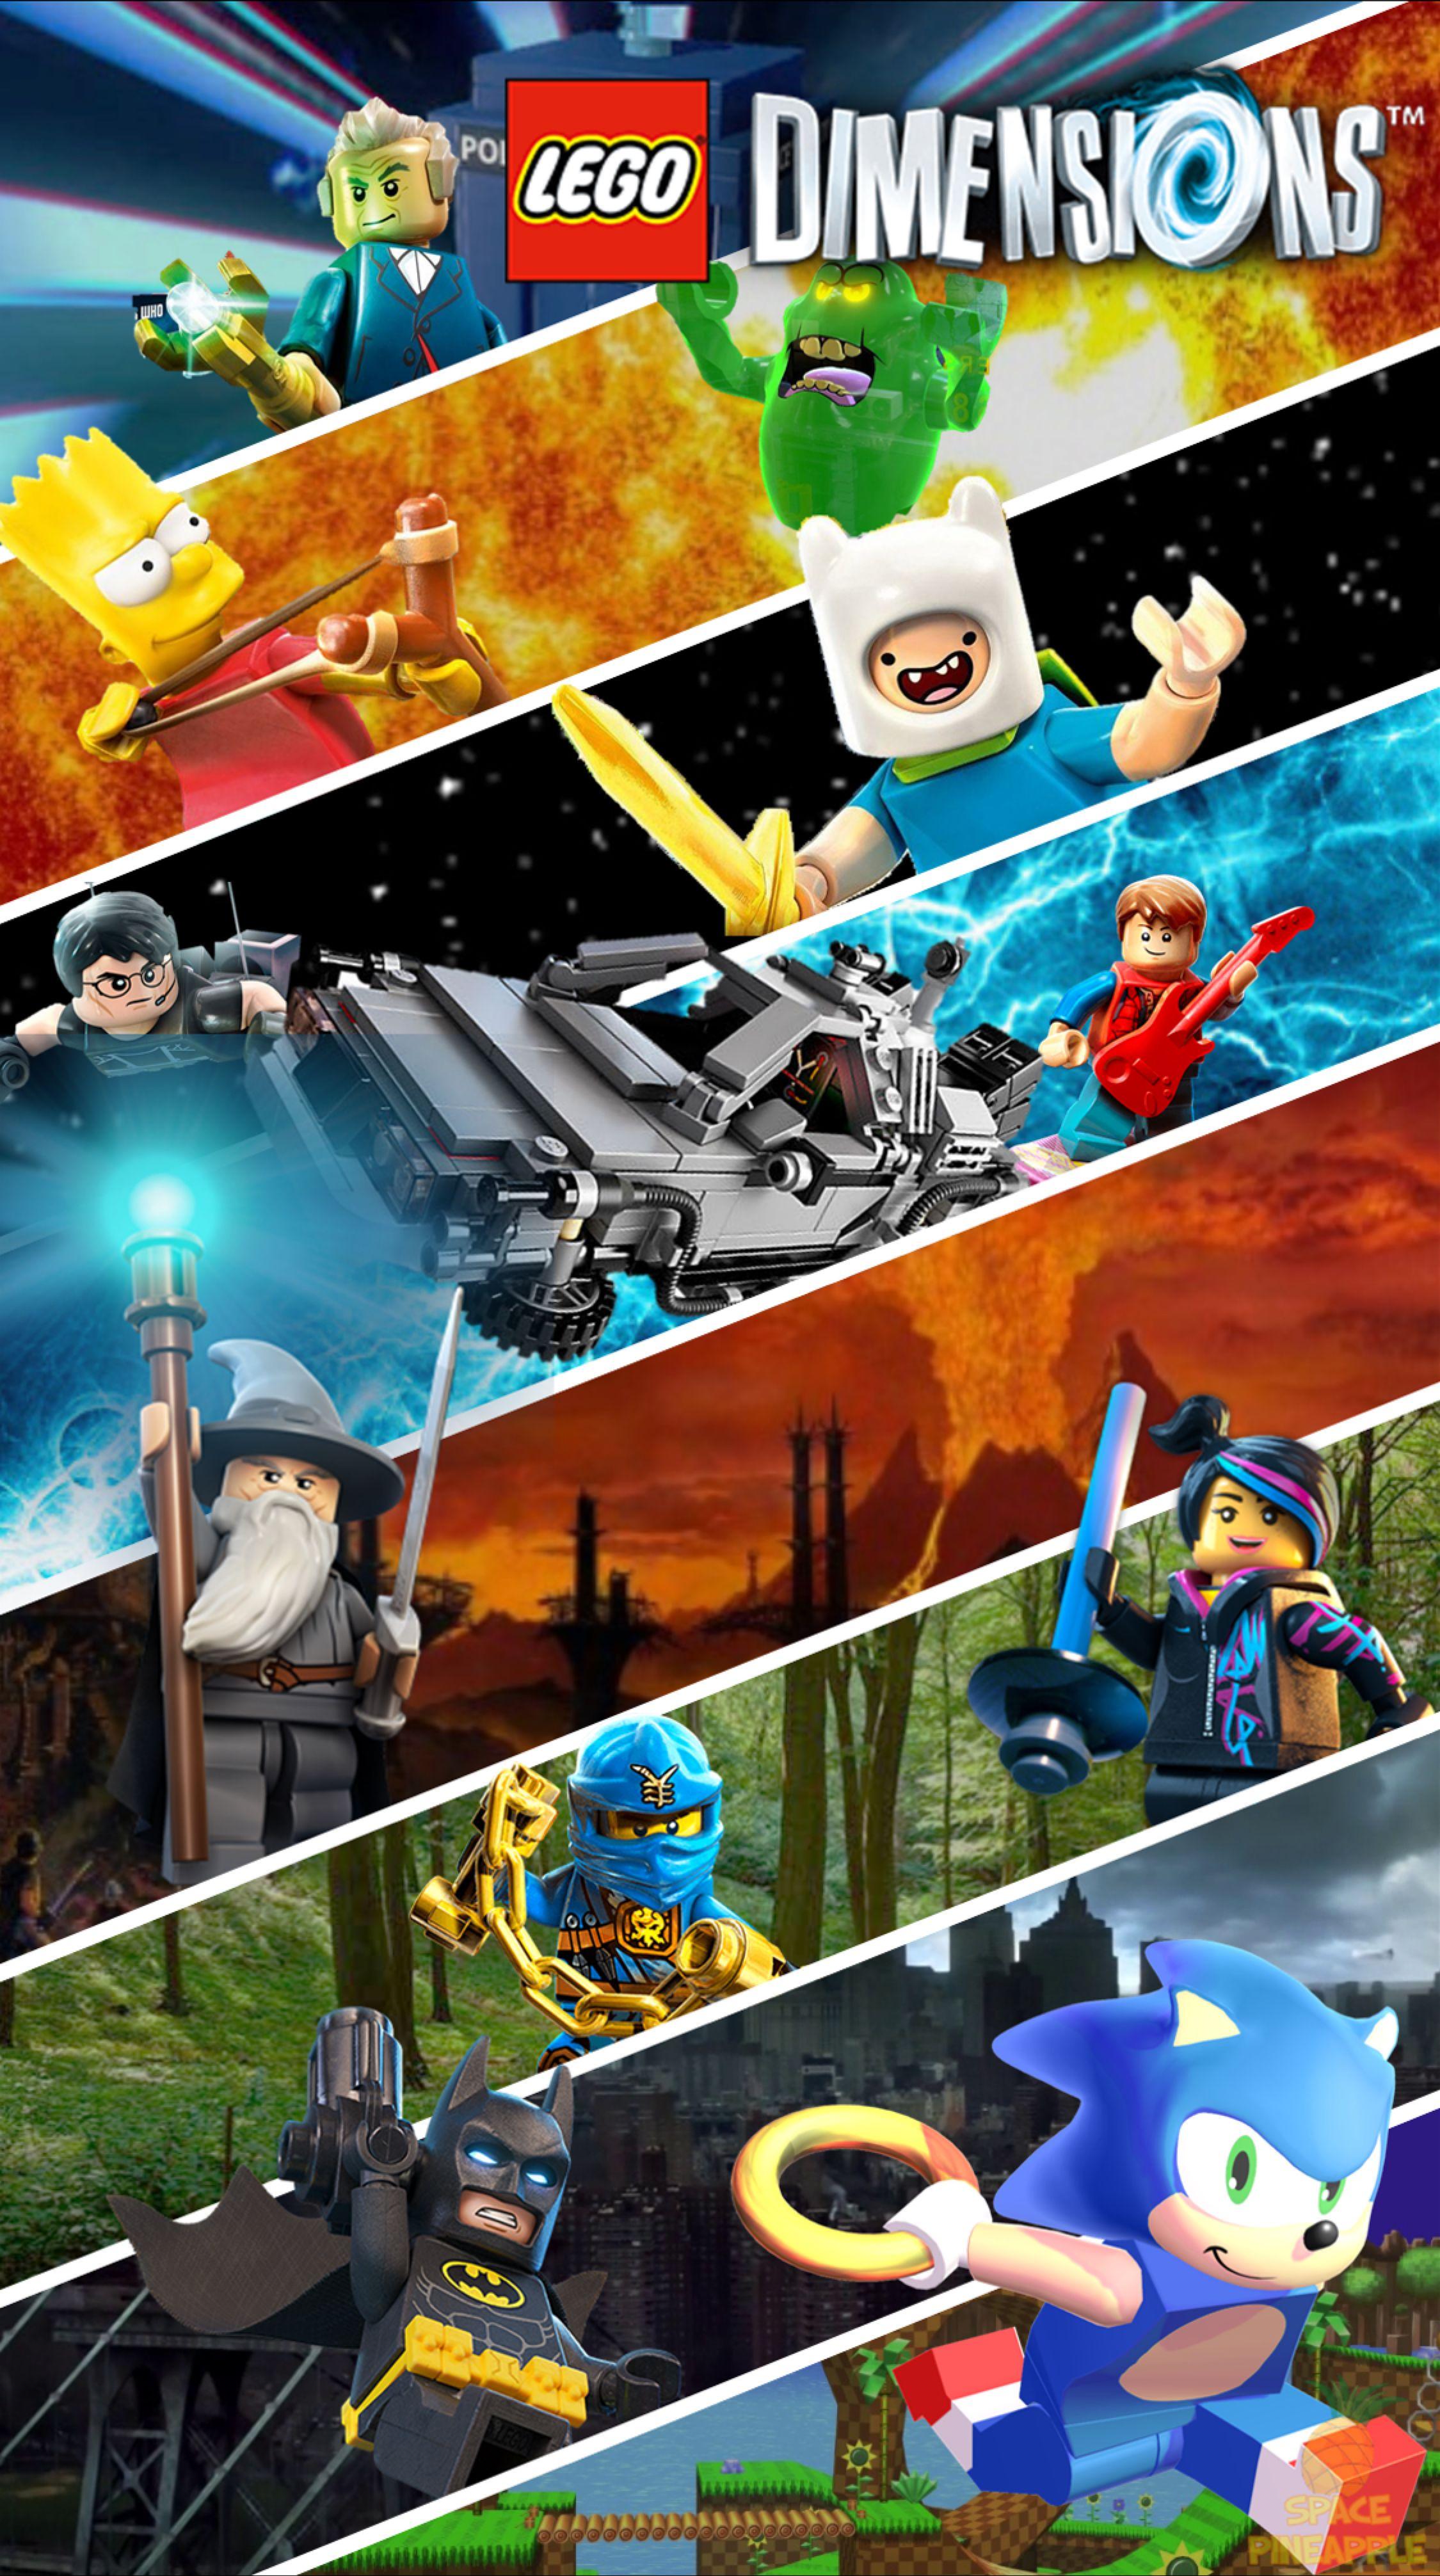 Lego Dimensions Poster by Space Pineapple on Lego